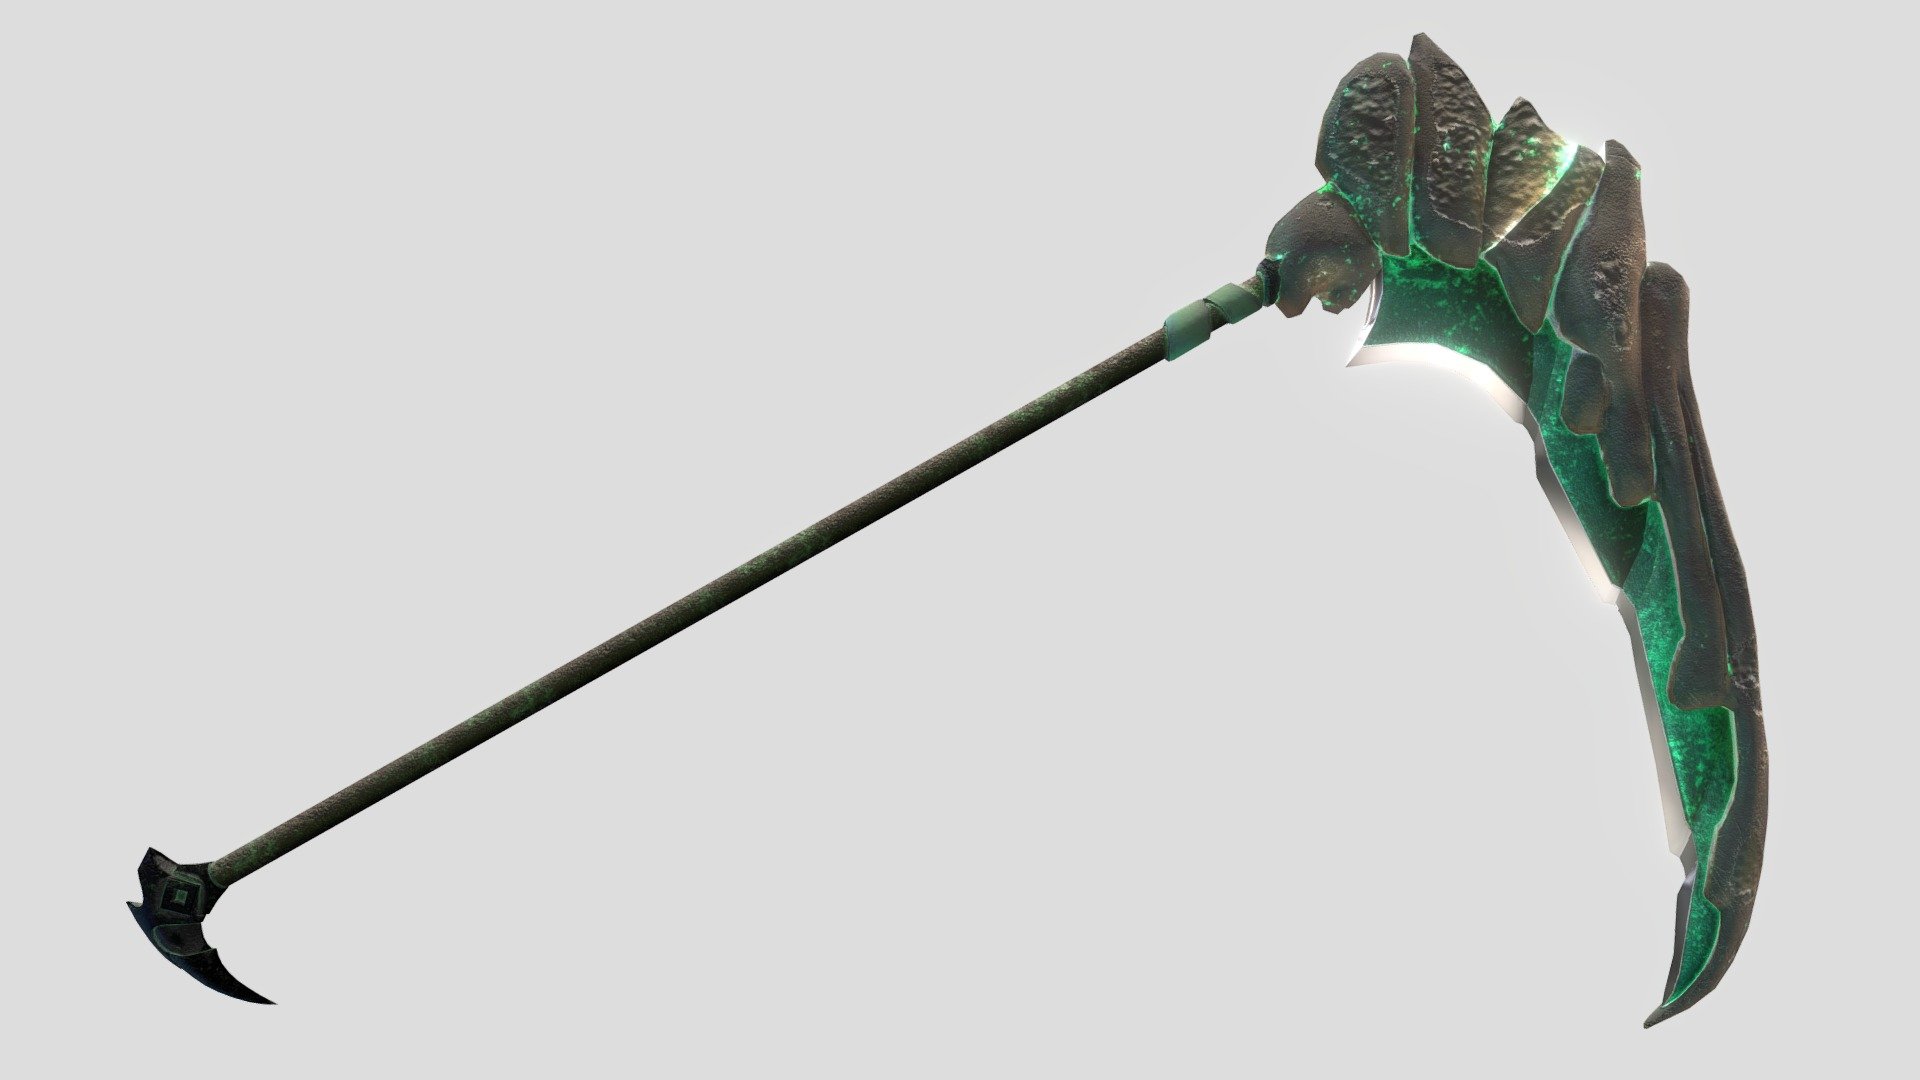 Check my profile for more of the same and follow me to see my future models, if you have any questions comment below or dm me.

About the model: This is a large scythe intended to be used with both hands. It's themed around nature and endurance.

Topology: 100% tris

Performance: It performs very well in-game, it's a good looking lowpoly, the textures can be down-scaled from their original 4k resolution to 1k and it will still have great quality.

Textures: 4k textures of: Color, Metallic, Roughness, Ambient occlussion, Curvature, World space normals, Thickness, Position, Emissive.

UV: Unwraped and organized.

Formats Included: FBX, OBJ, GLB, PLY, STL, USDC, X3D, DAE, ABC, BLEND 3d model